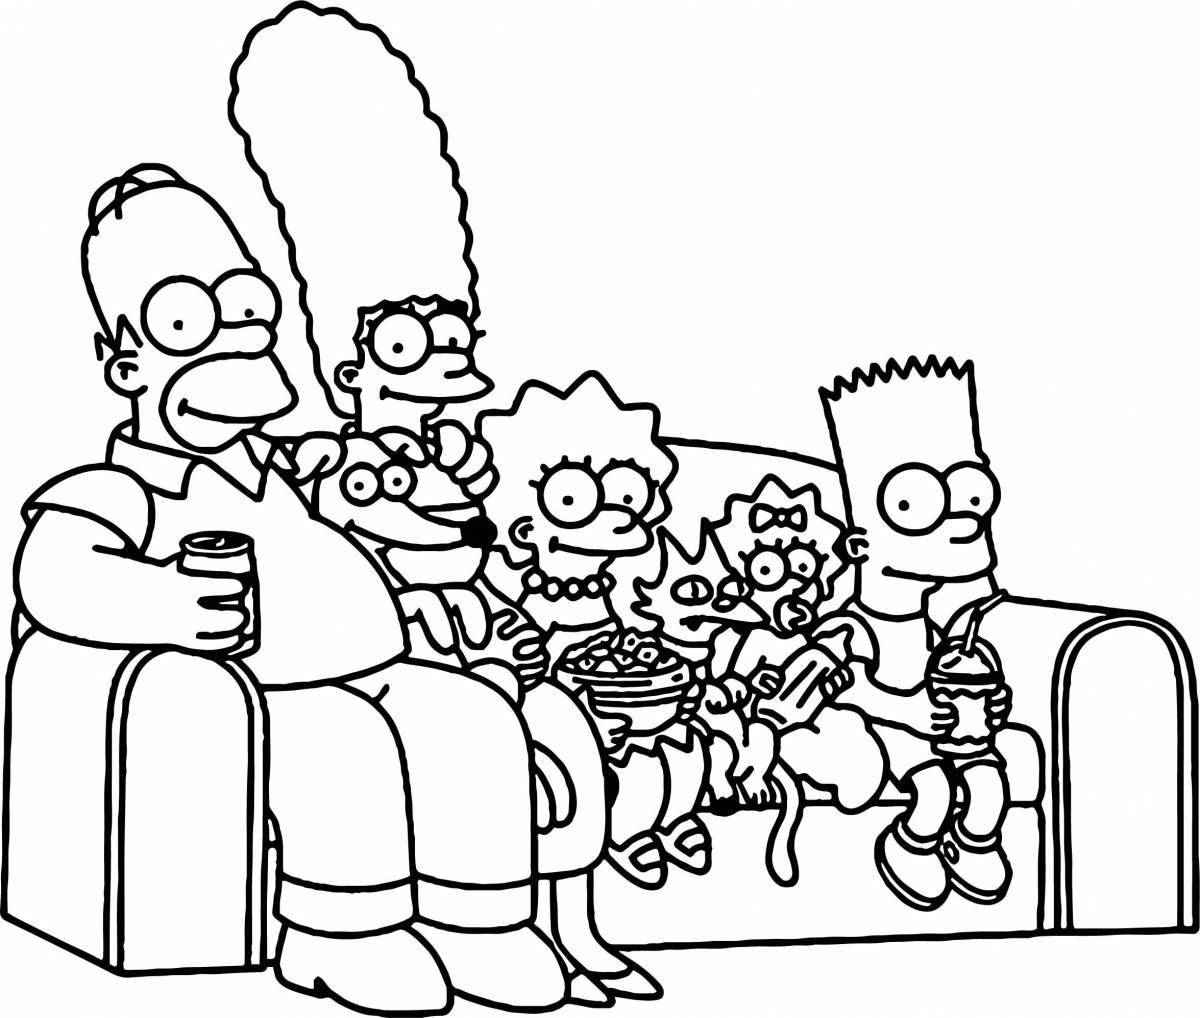 Fancy coloring by numbers simpsons